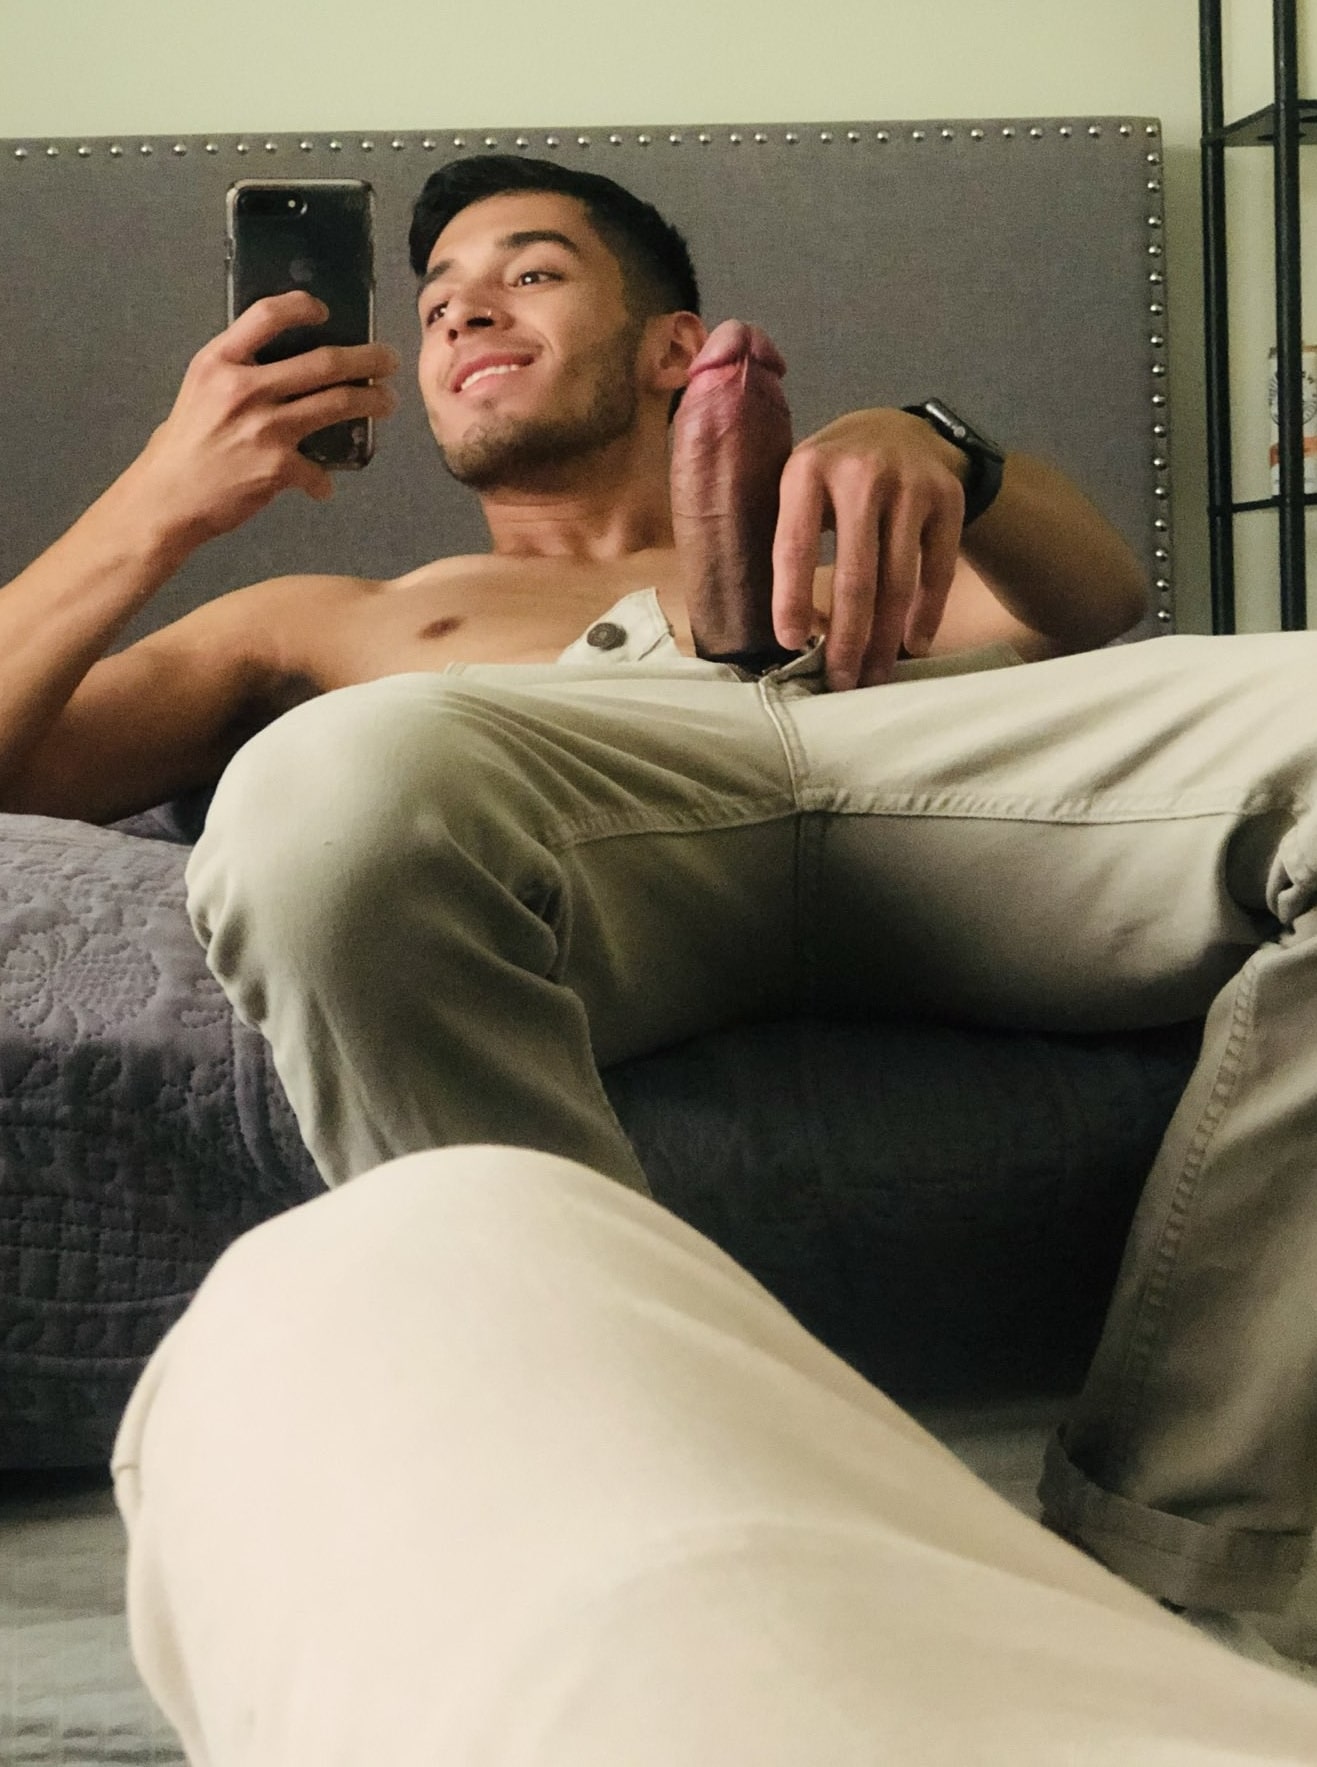 Hot guy with a thick penis